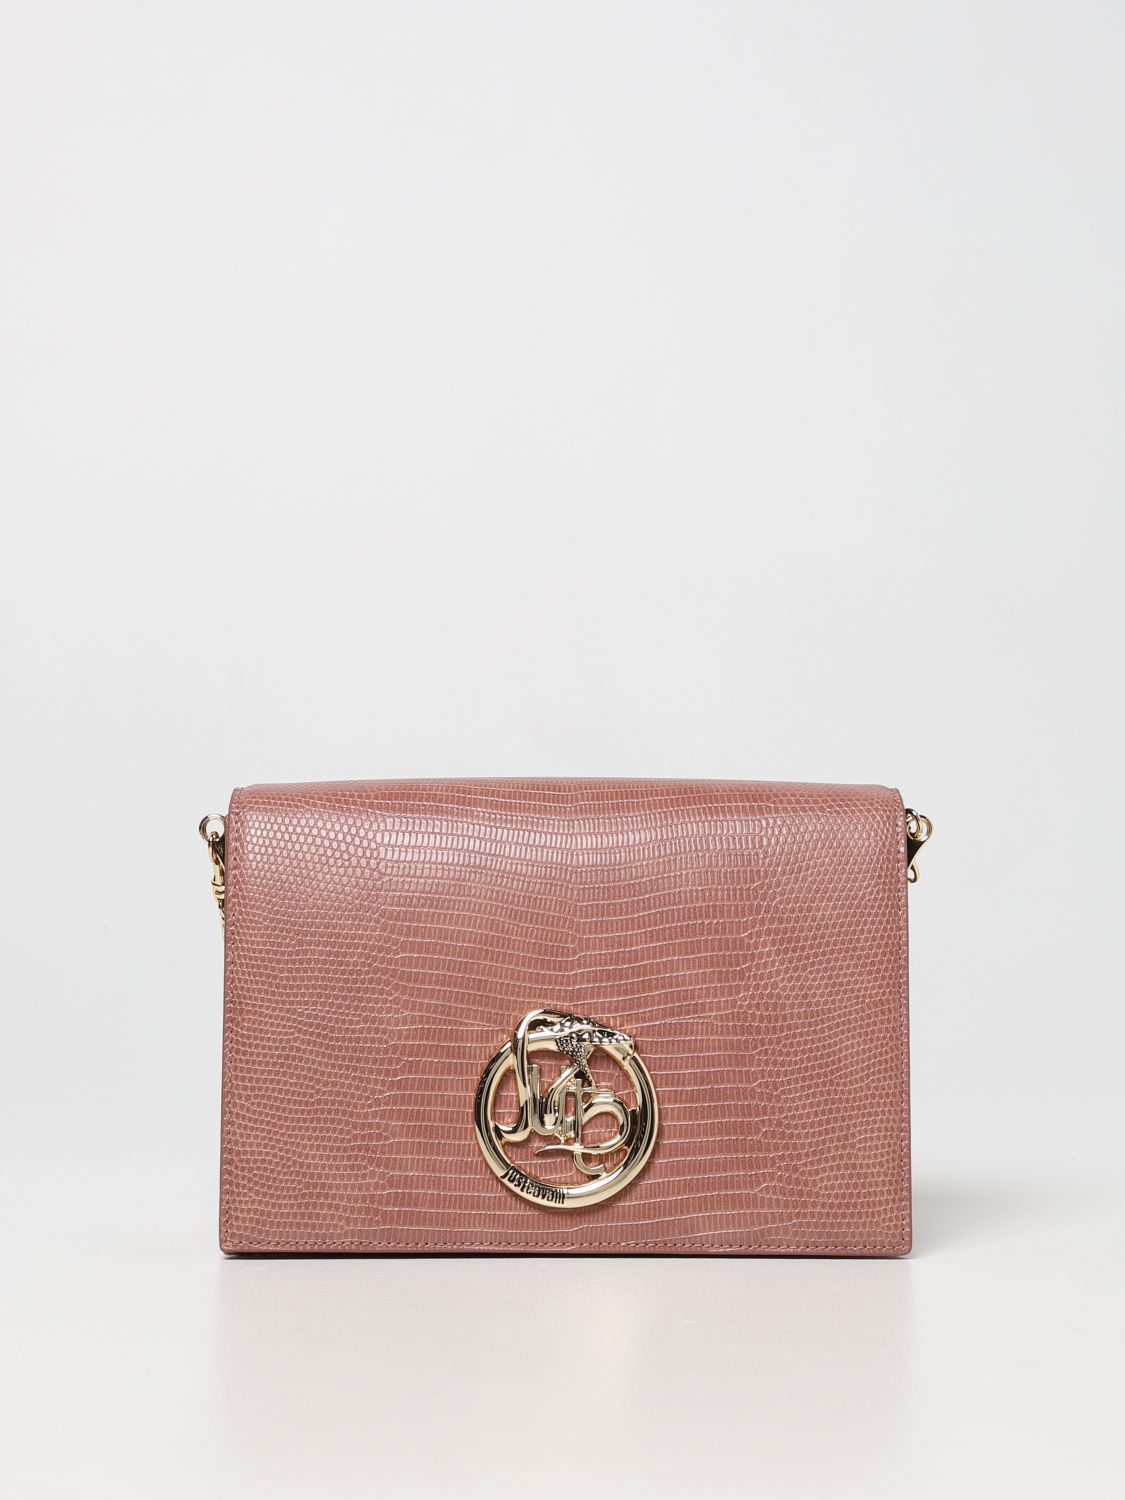 JUST CAVALLI: bag in reptile print leather - Blush Pink 